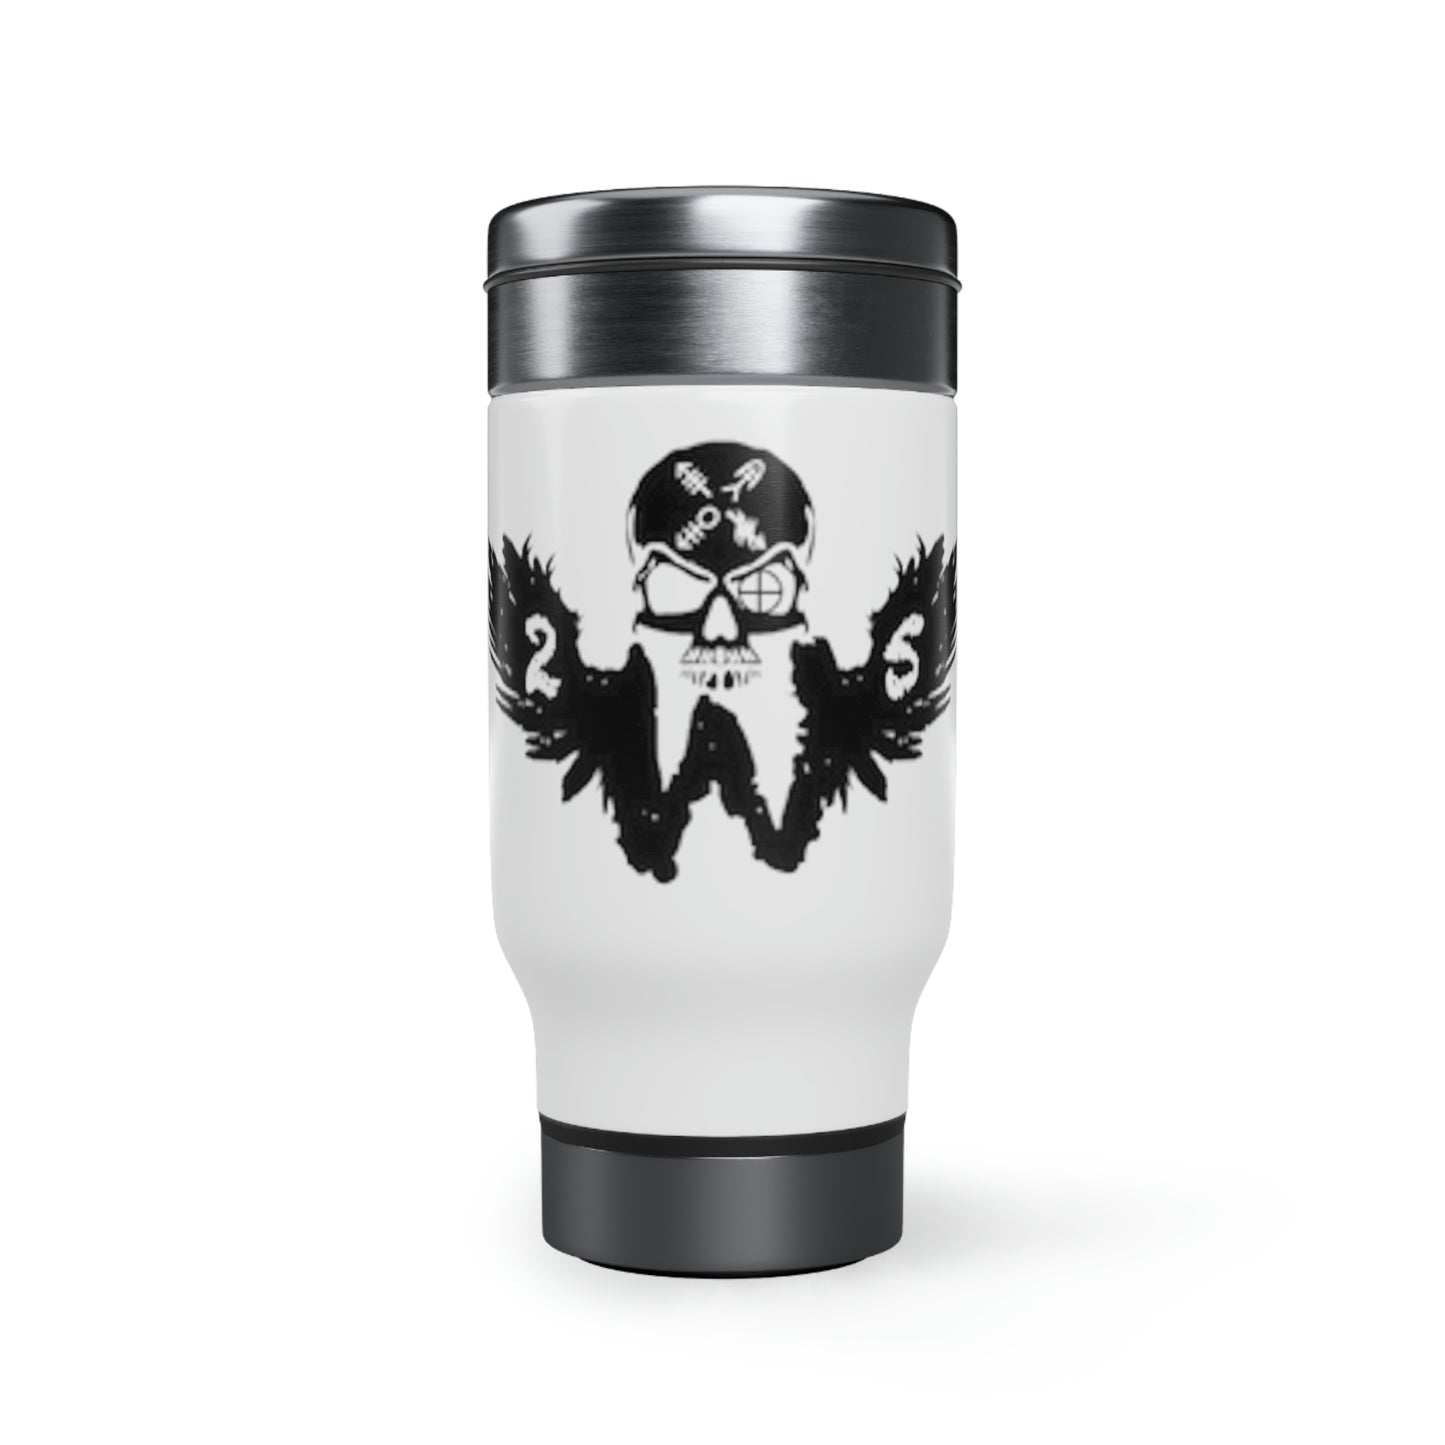 Weapons Co 2/5 Stainless Steel Travel Mug with Handle, 14oz